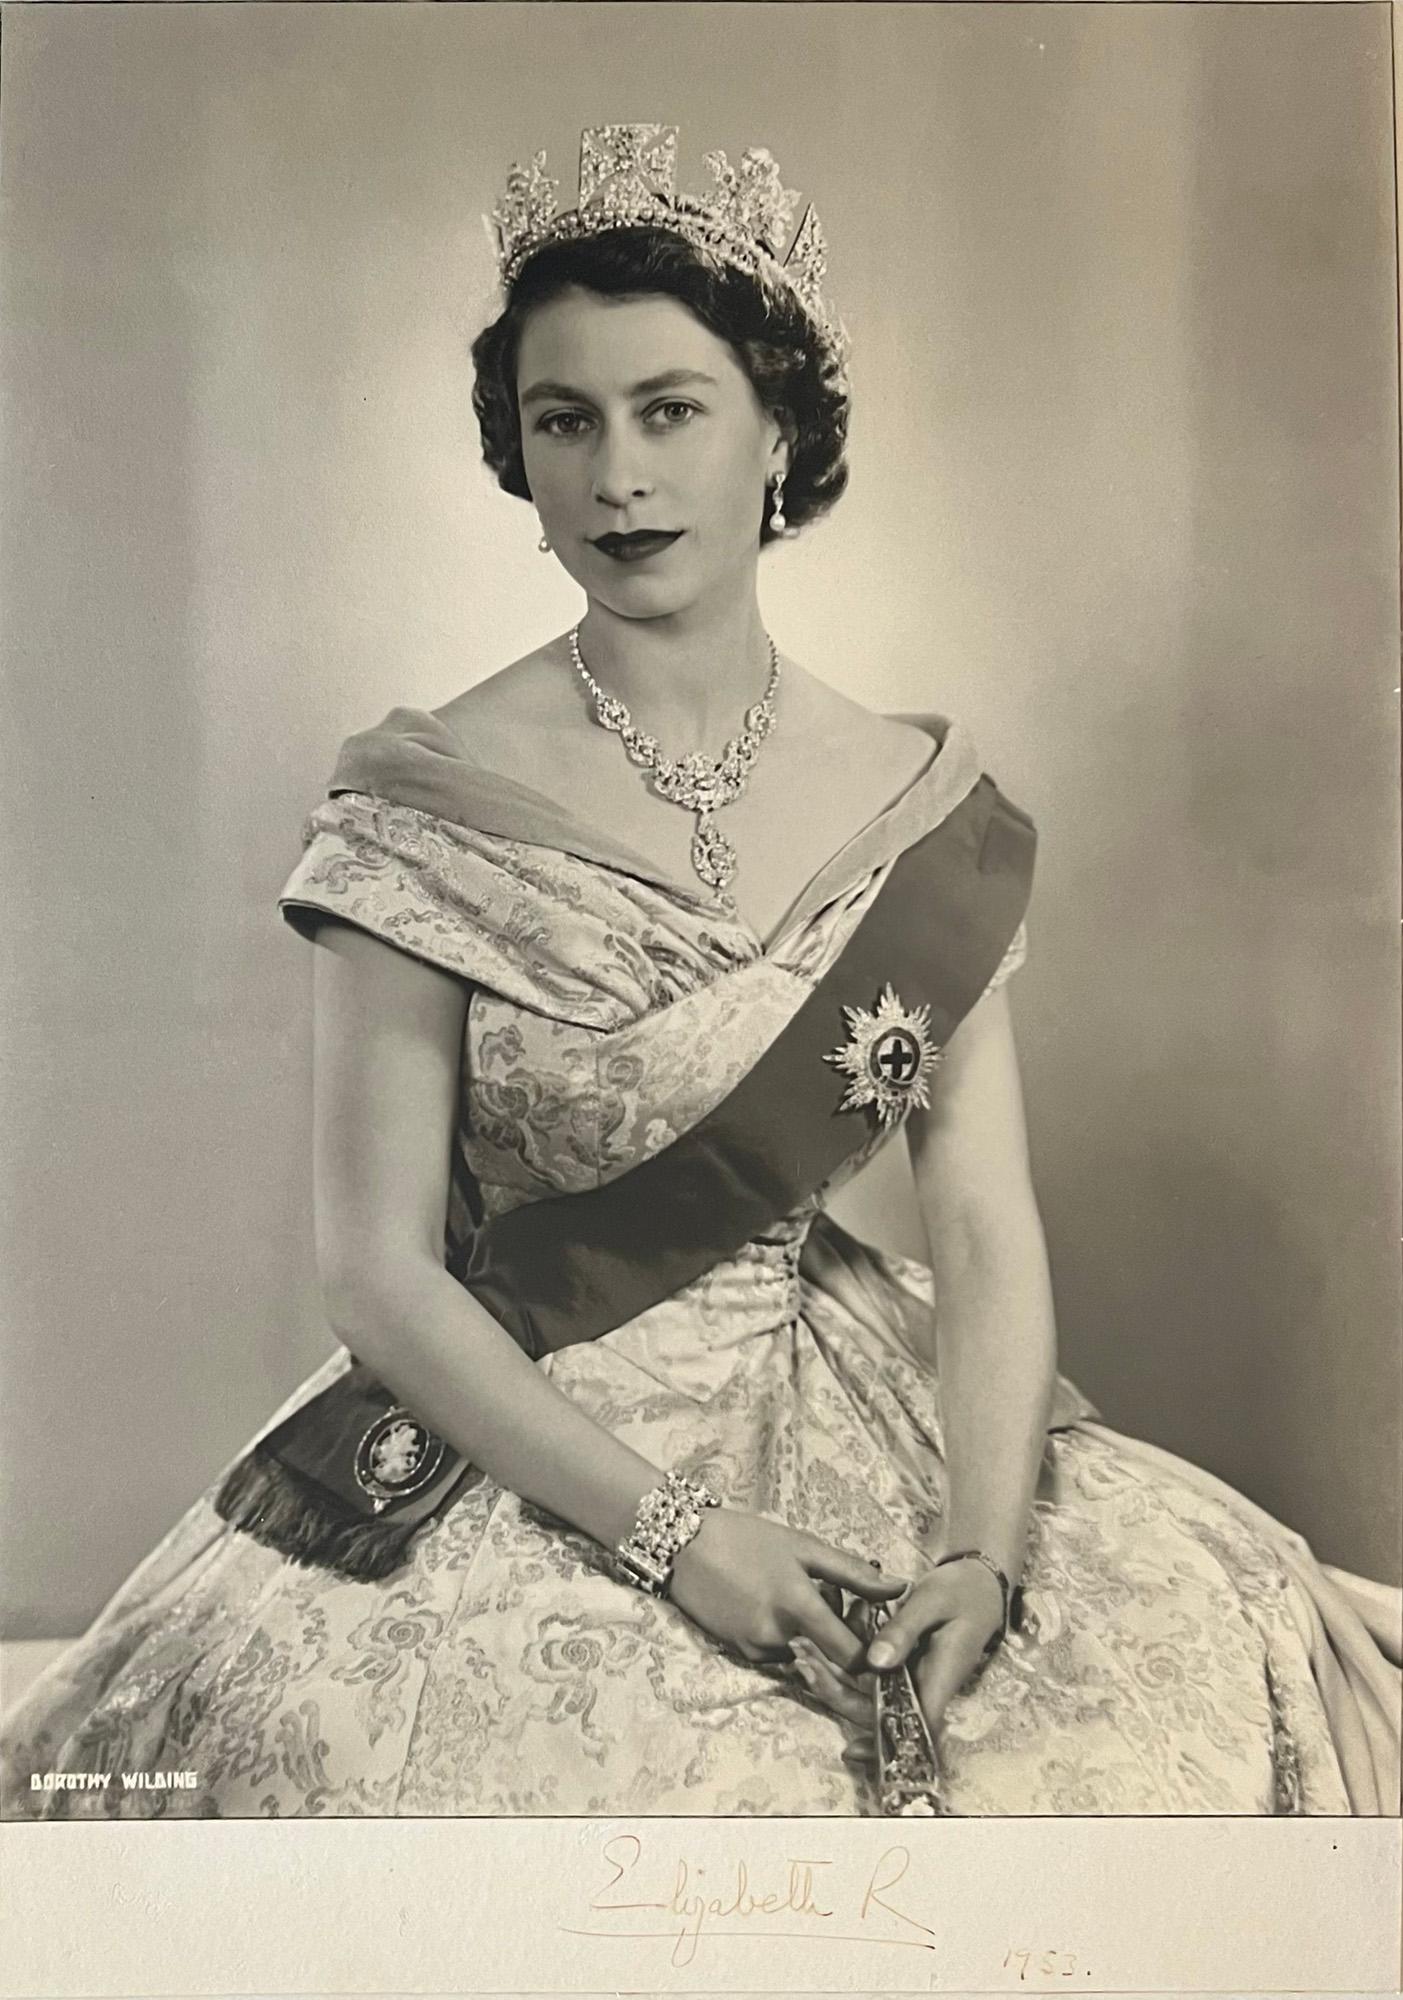 Queen Elizabeth II, portrait photograph by Dorothy Wilding.

Bromide photograph. 1953. Laid onto board. Signed by the Queen below the photograph, dated 1953. 

Dorothy Wilding was the first female Royal photographer. 

490mm by 345mm (photograph),